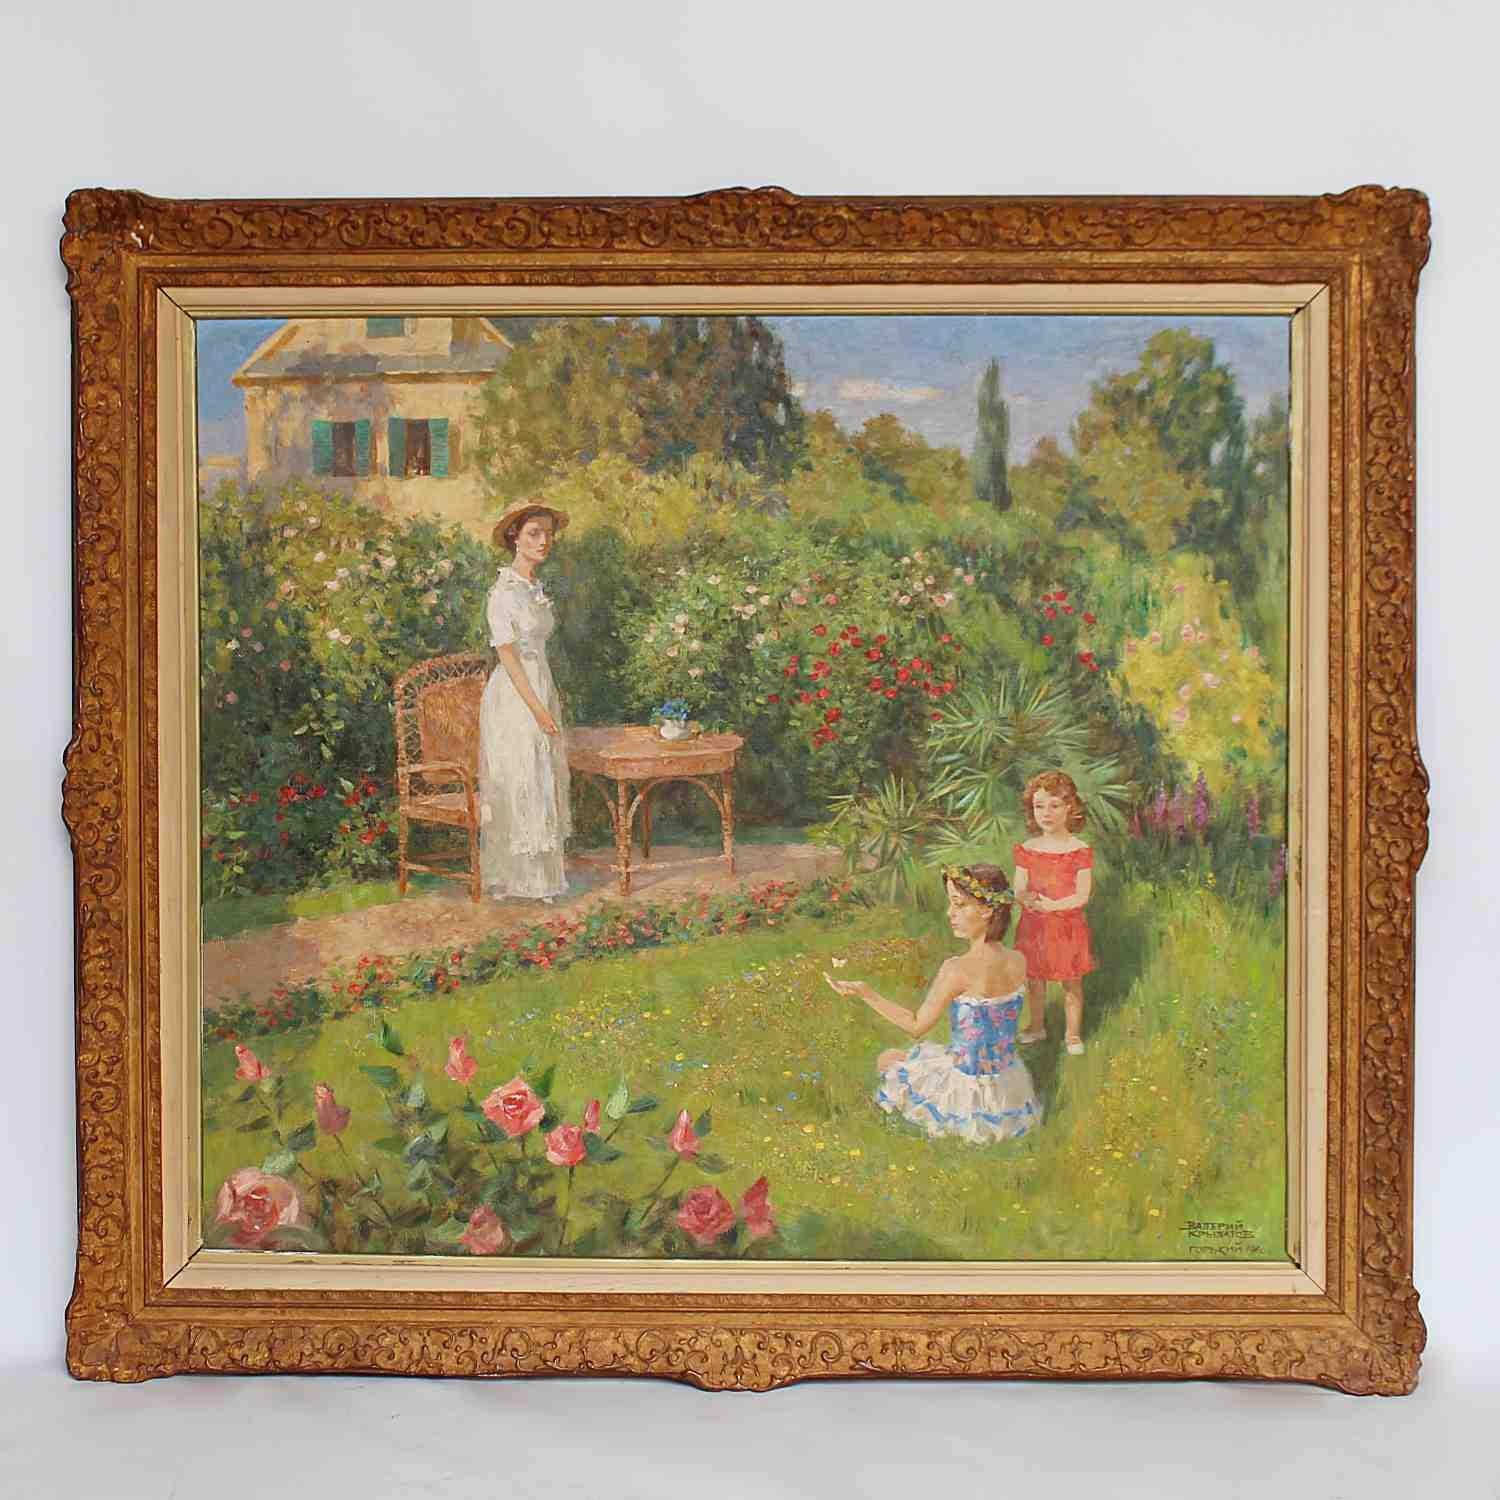 An oil on canvas garden scene, depicting a mother in a full length white dress, watching over her two children playing with a butterfly, enjoying the garden, surrounded by roses. Signed: ??????? ???????? ??????? 1960 (Valeriy Krilatov Gorkiy) to